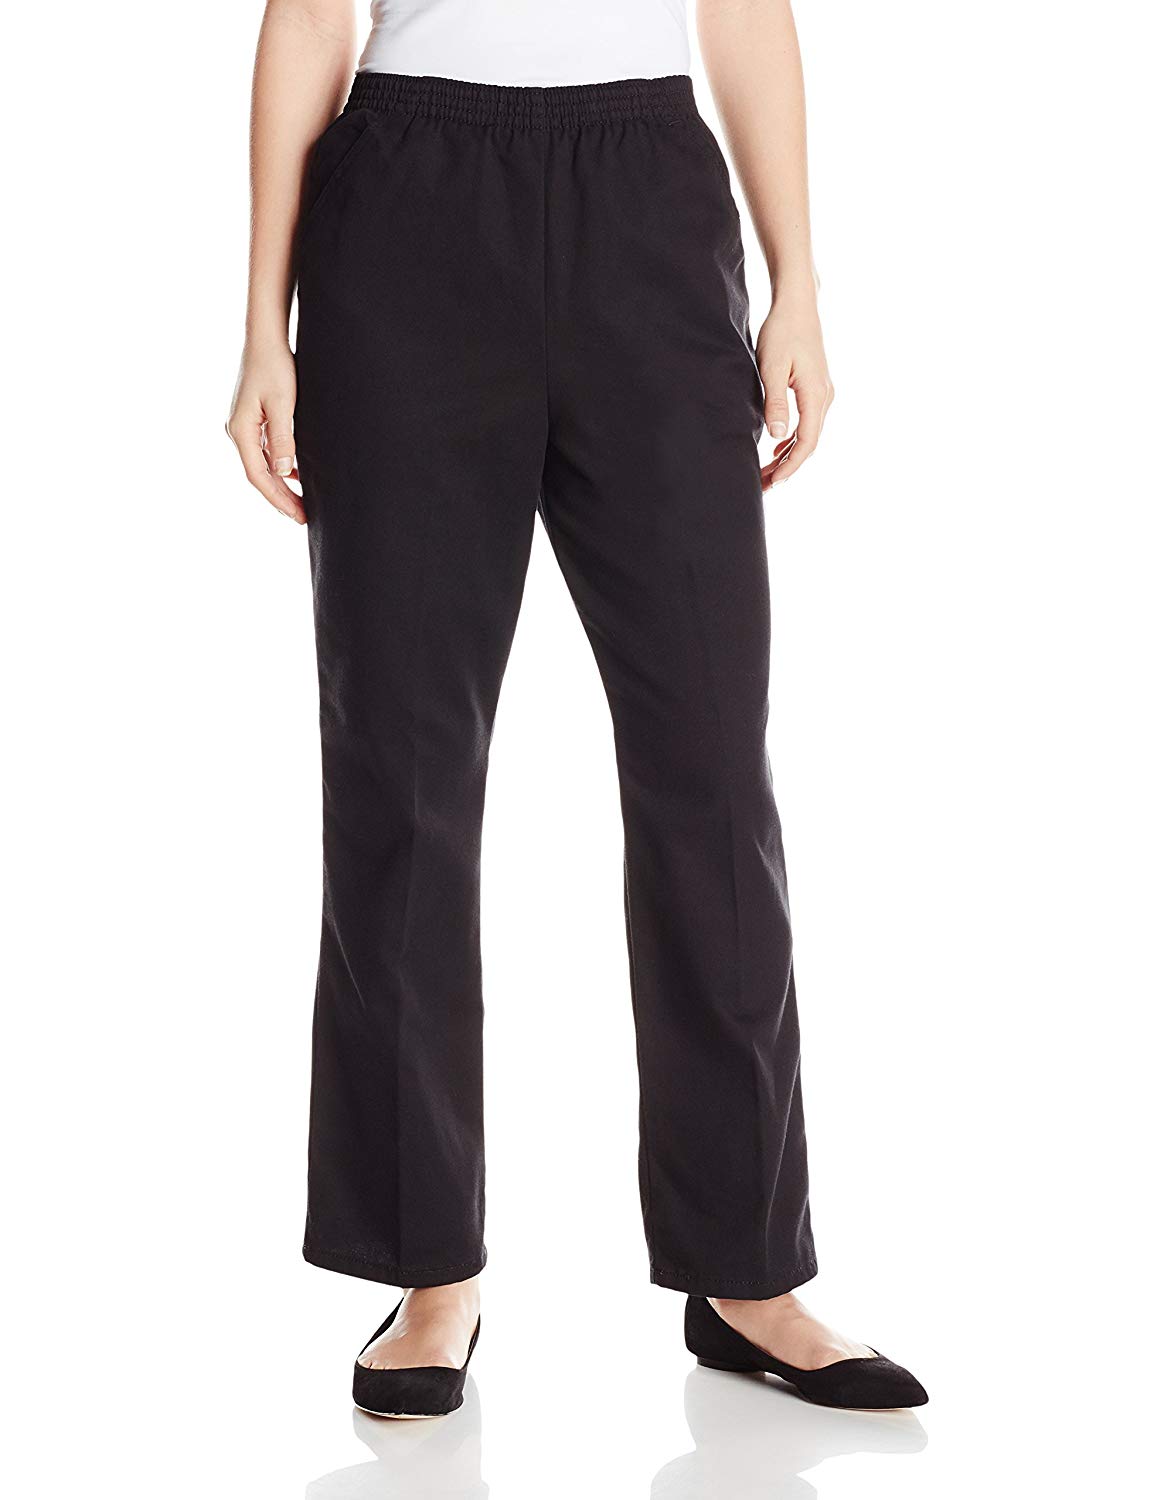 Chic Classic Collection Women's Petite Cotton Pull-On Pant, Black Twill ...